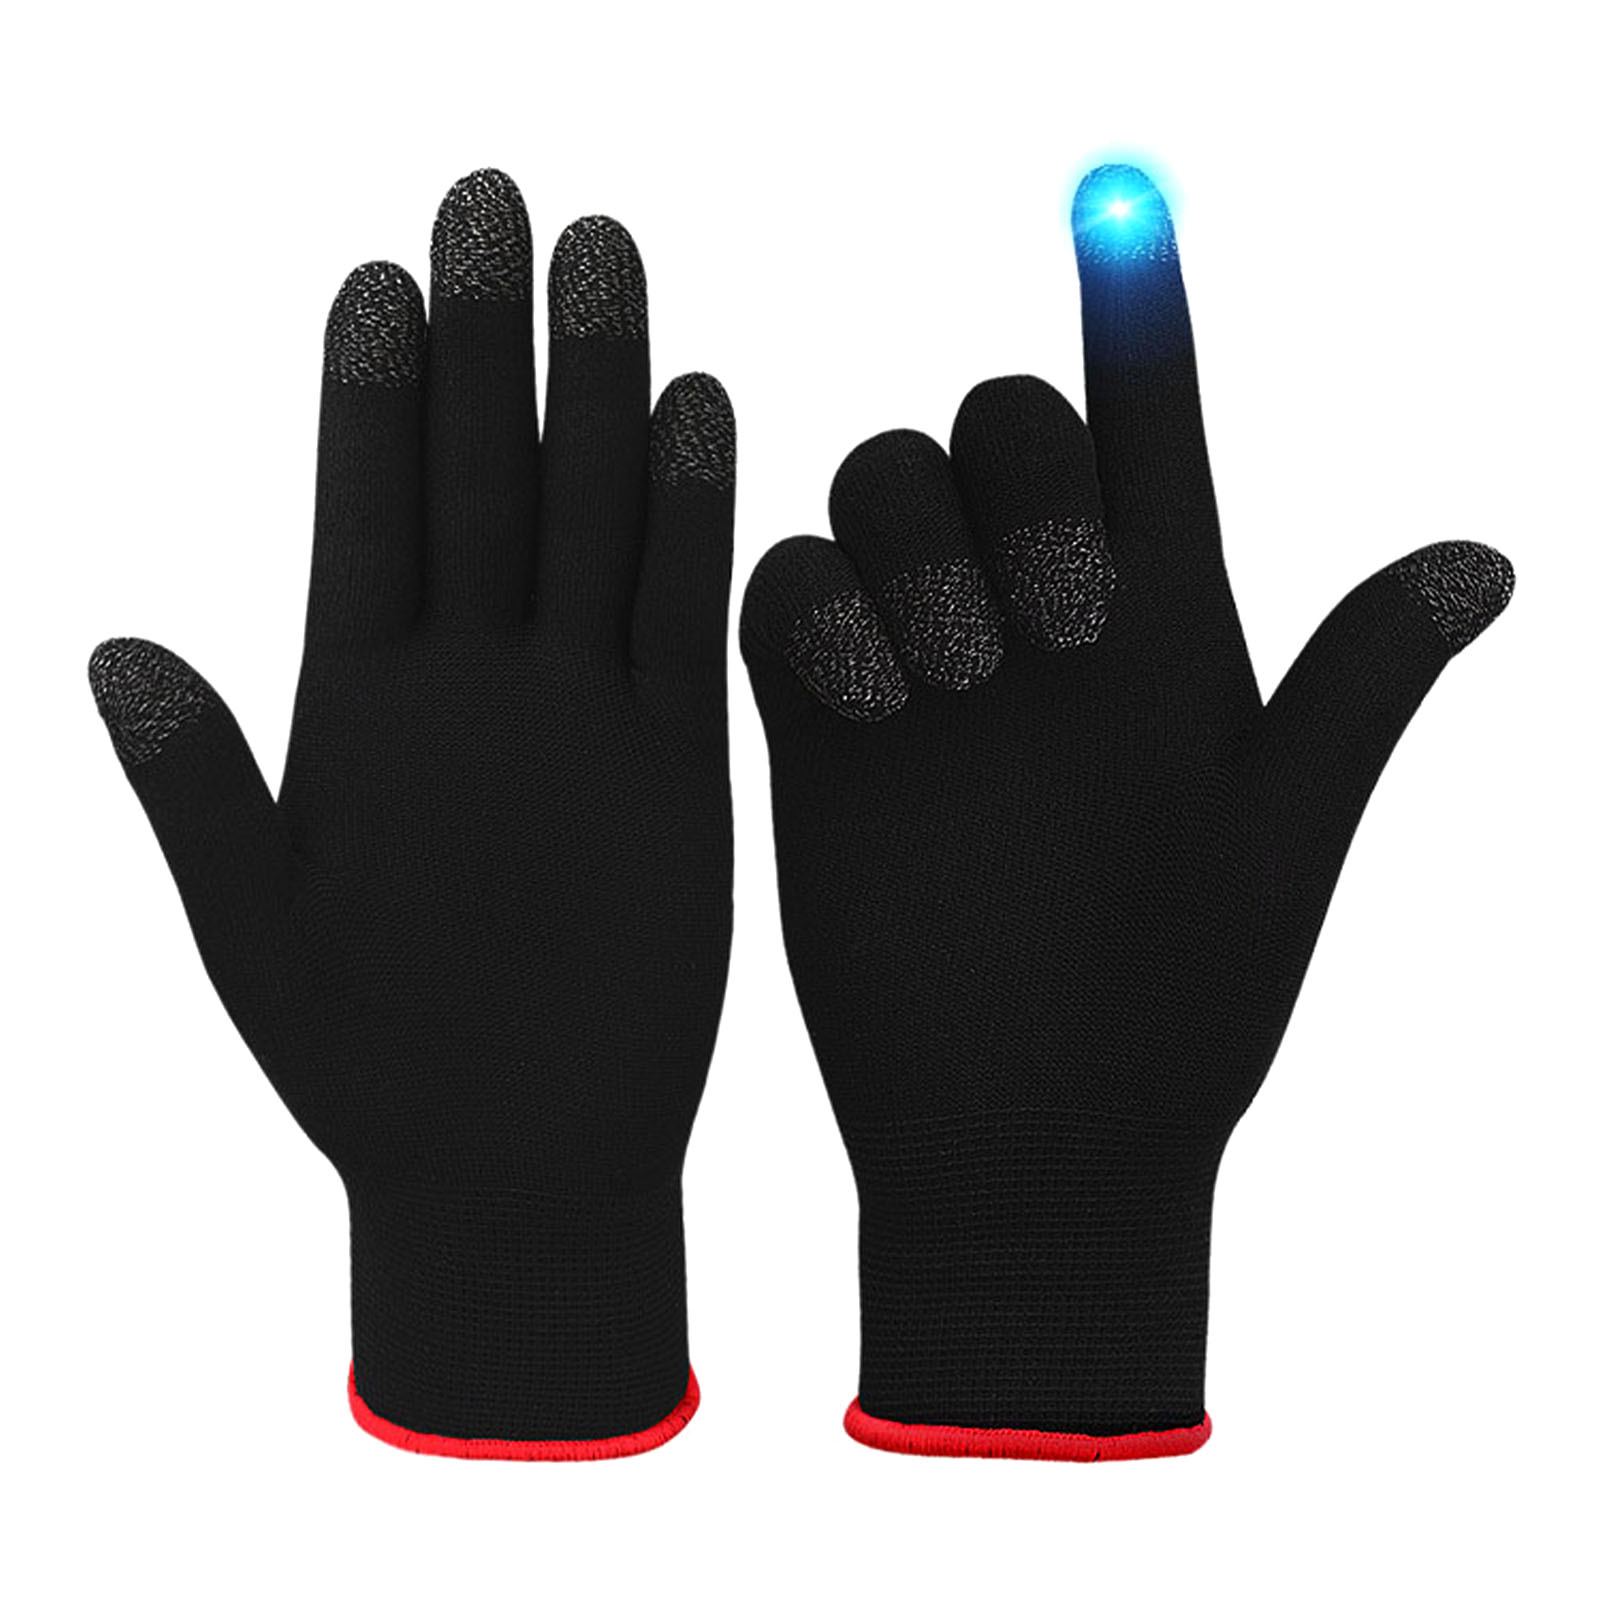 gloves sweat proof full sleeve pubg mobile game joystick touch screen trigger warm gaming%20(1)